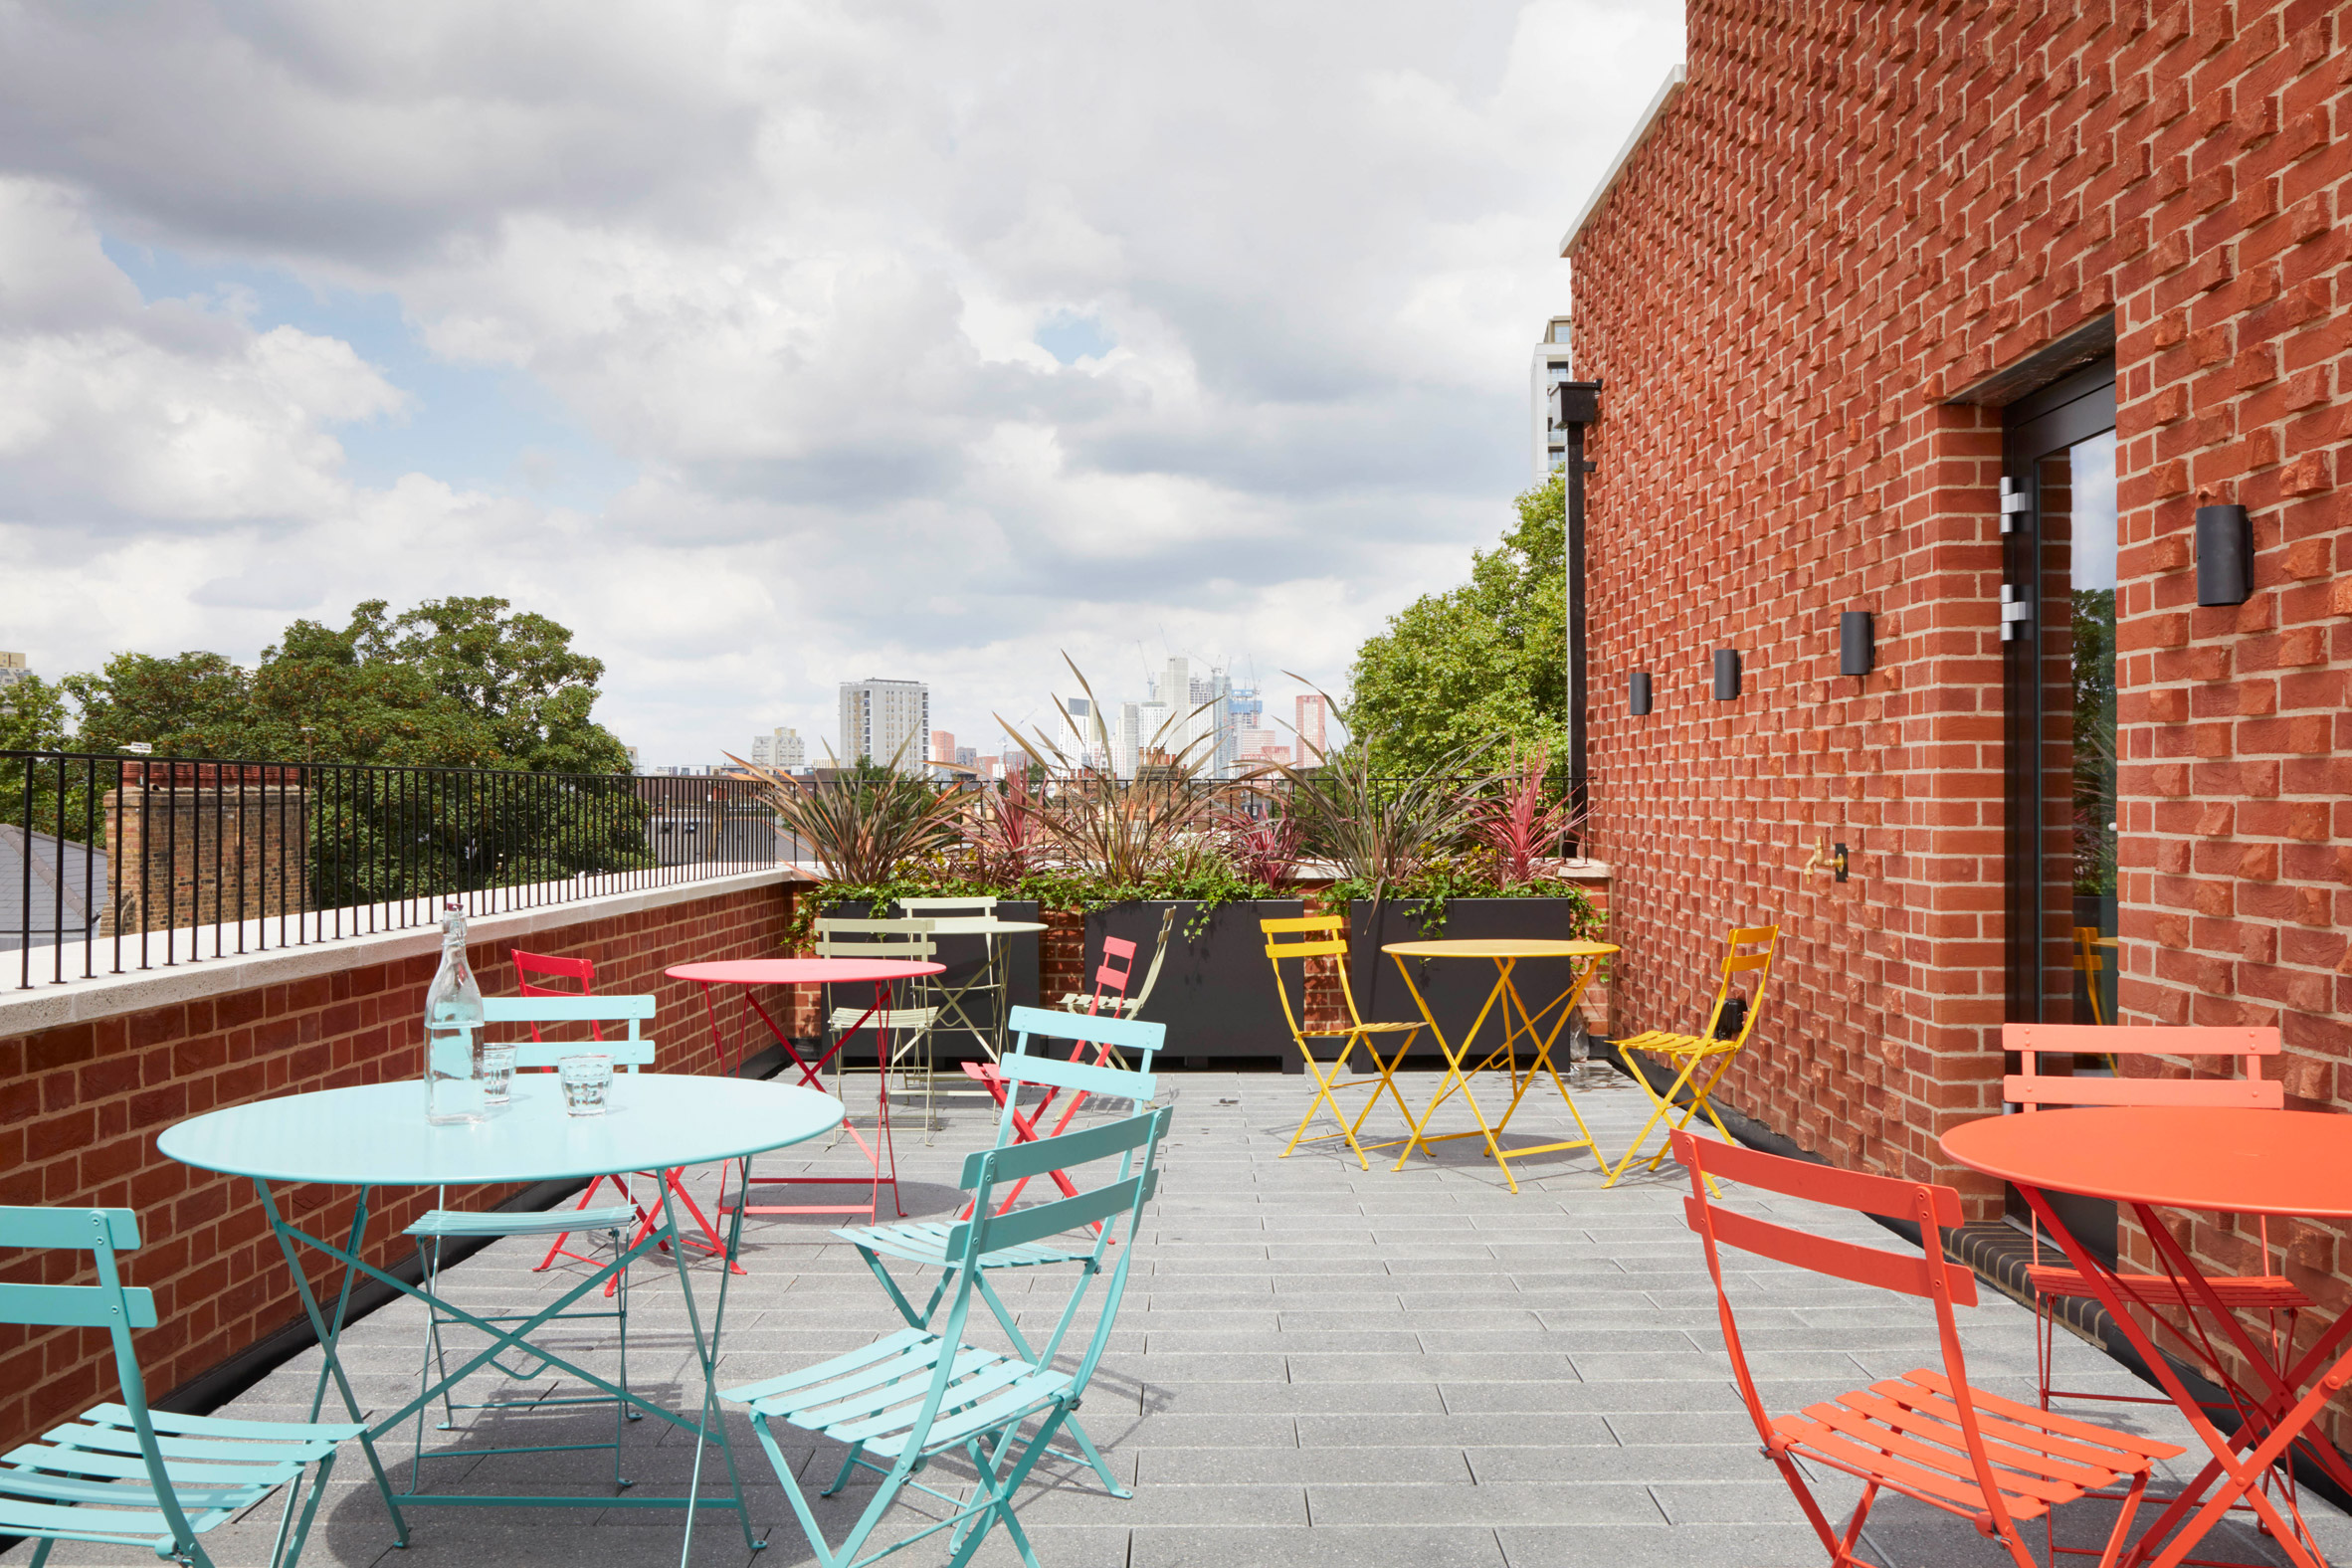 Roof terrace in The Department Store Studios by Squire and Partners